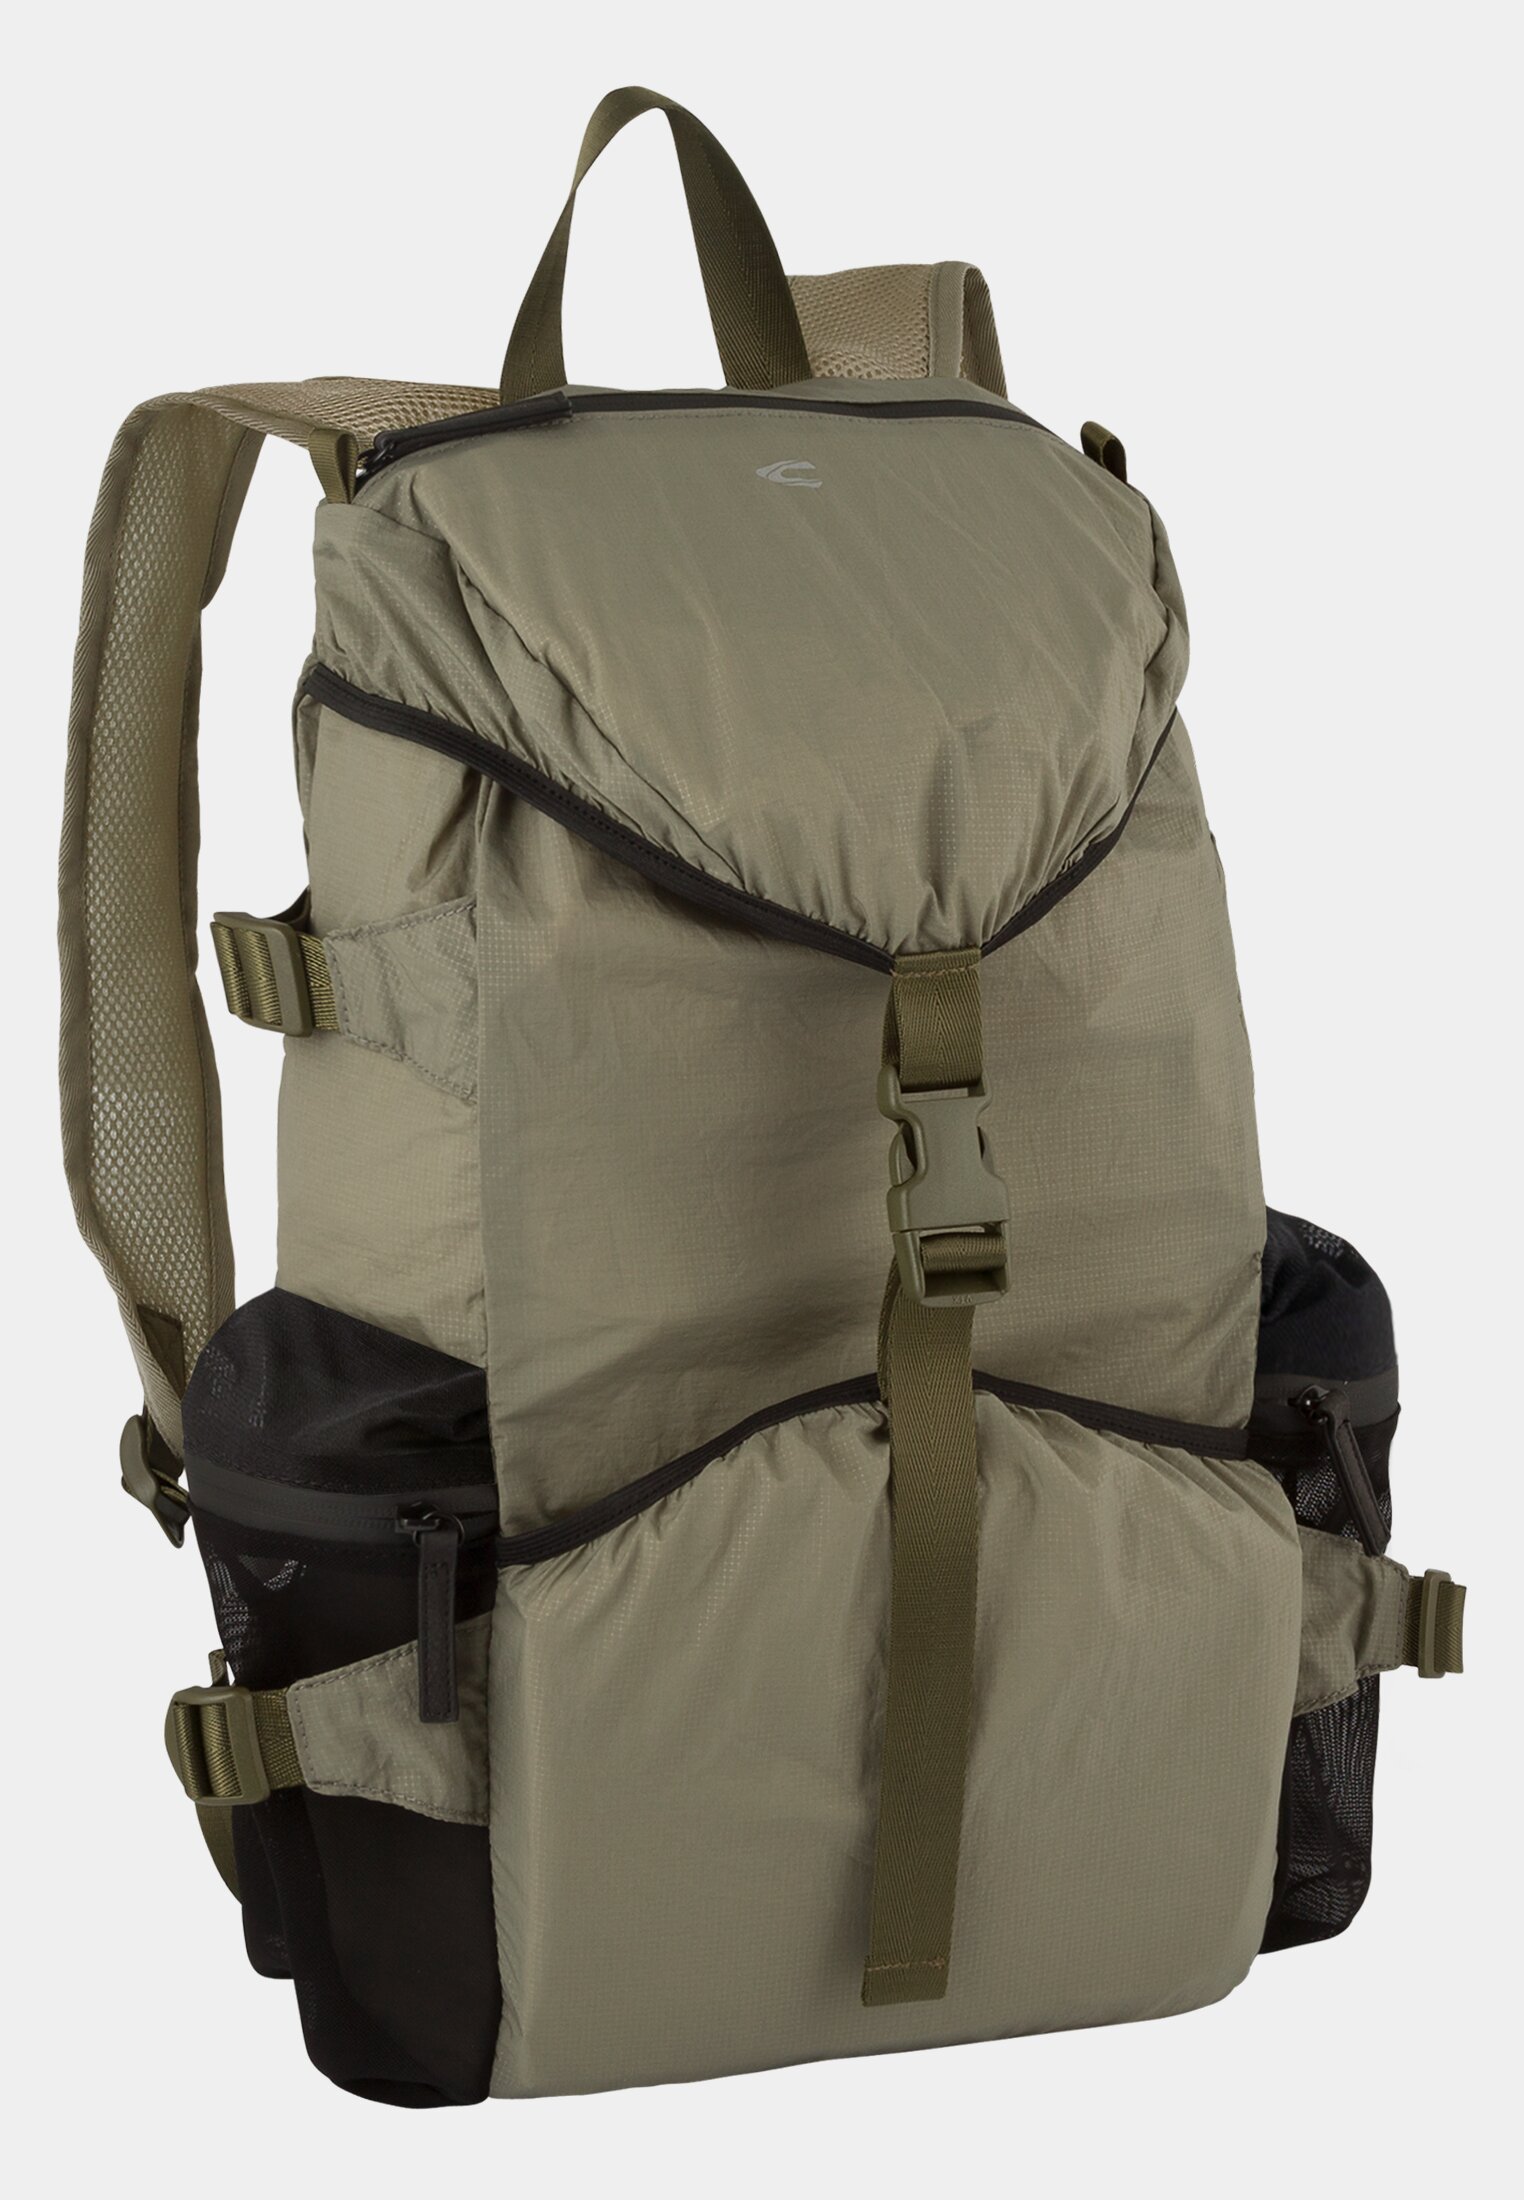 Camel Active Backpack with drawstring